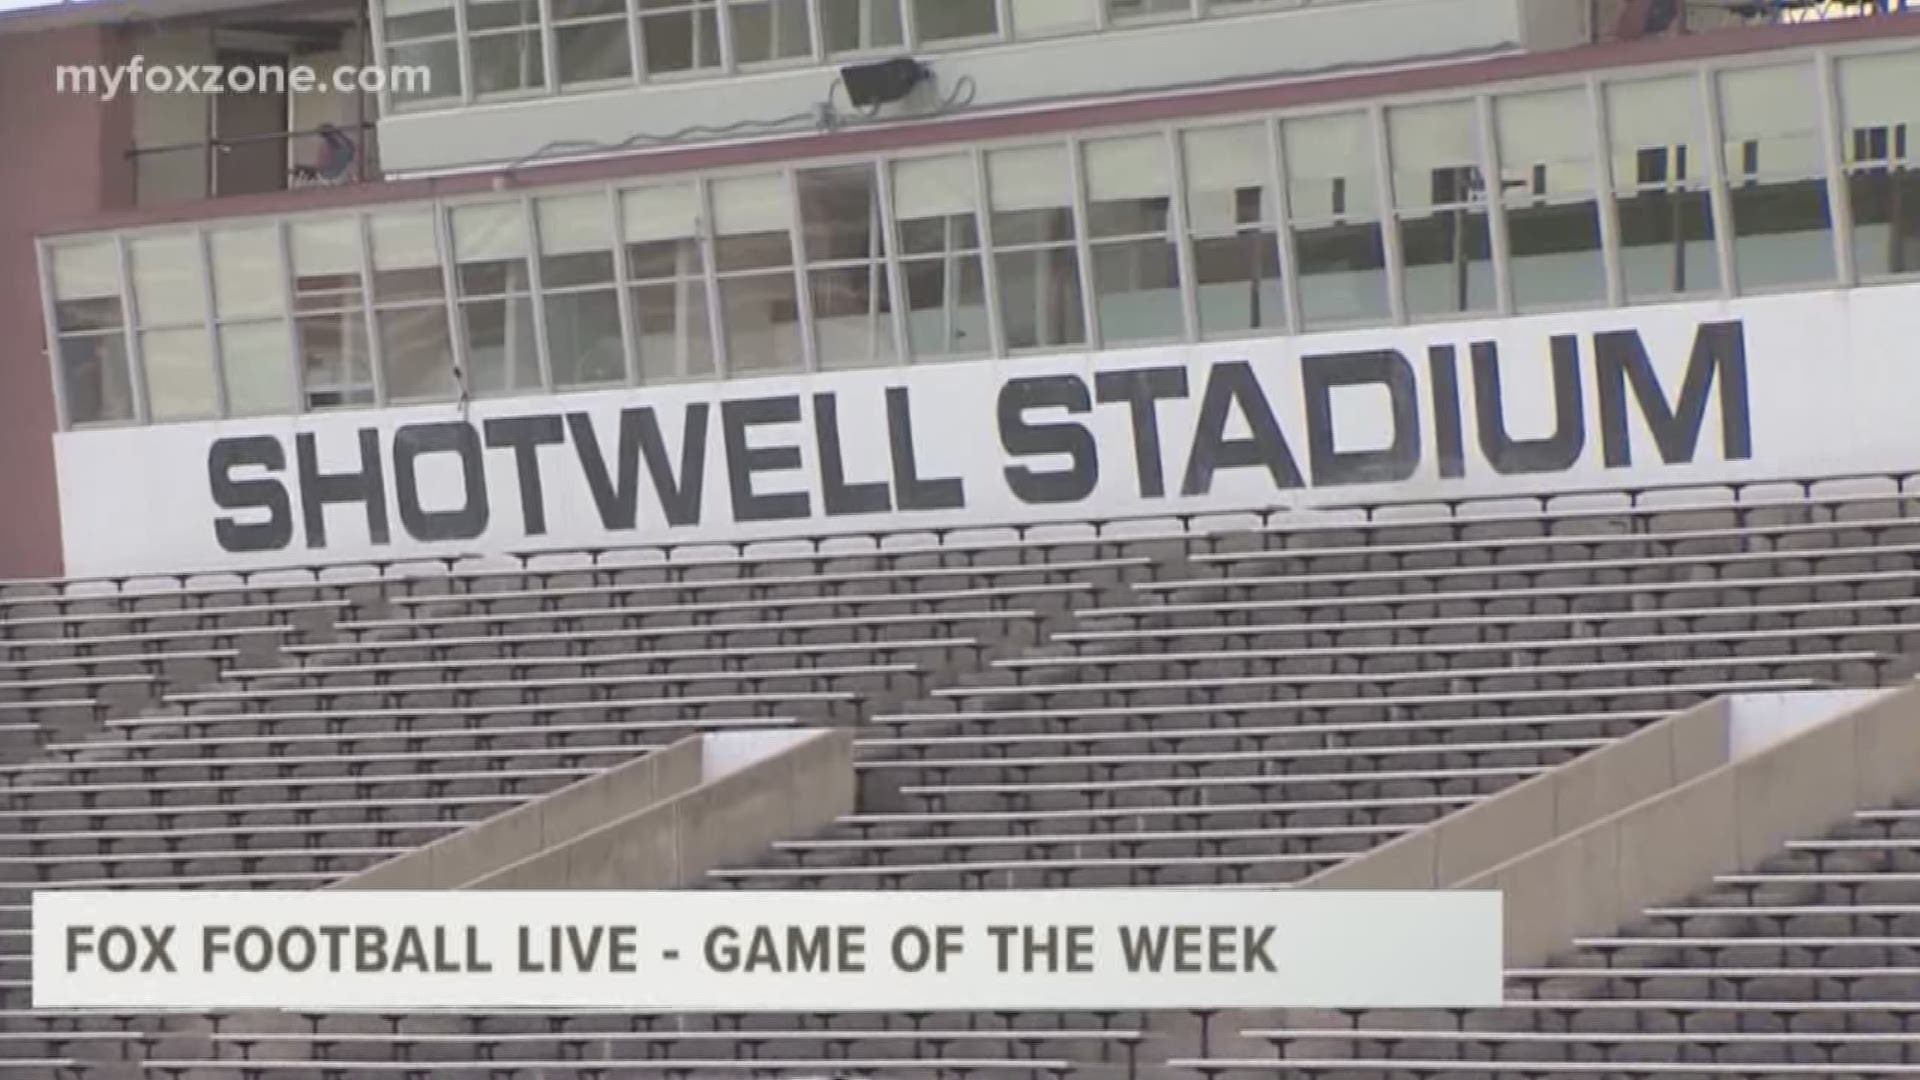 Sports Director Dax Gray was at Shotwell Stadium to give us the latest